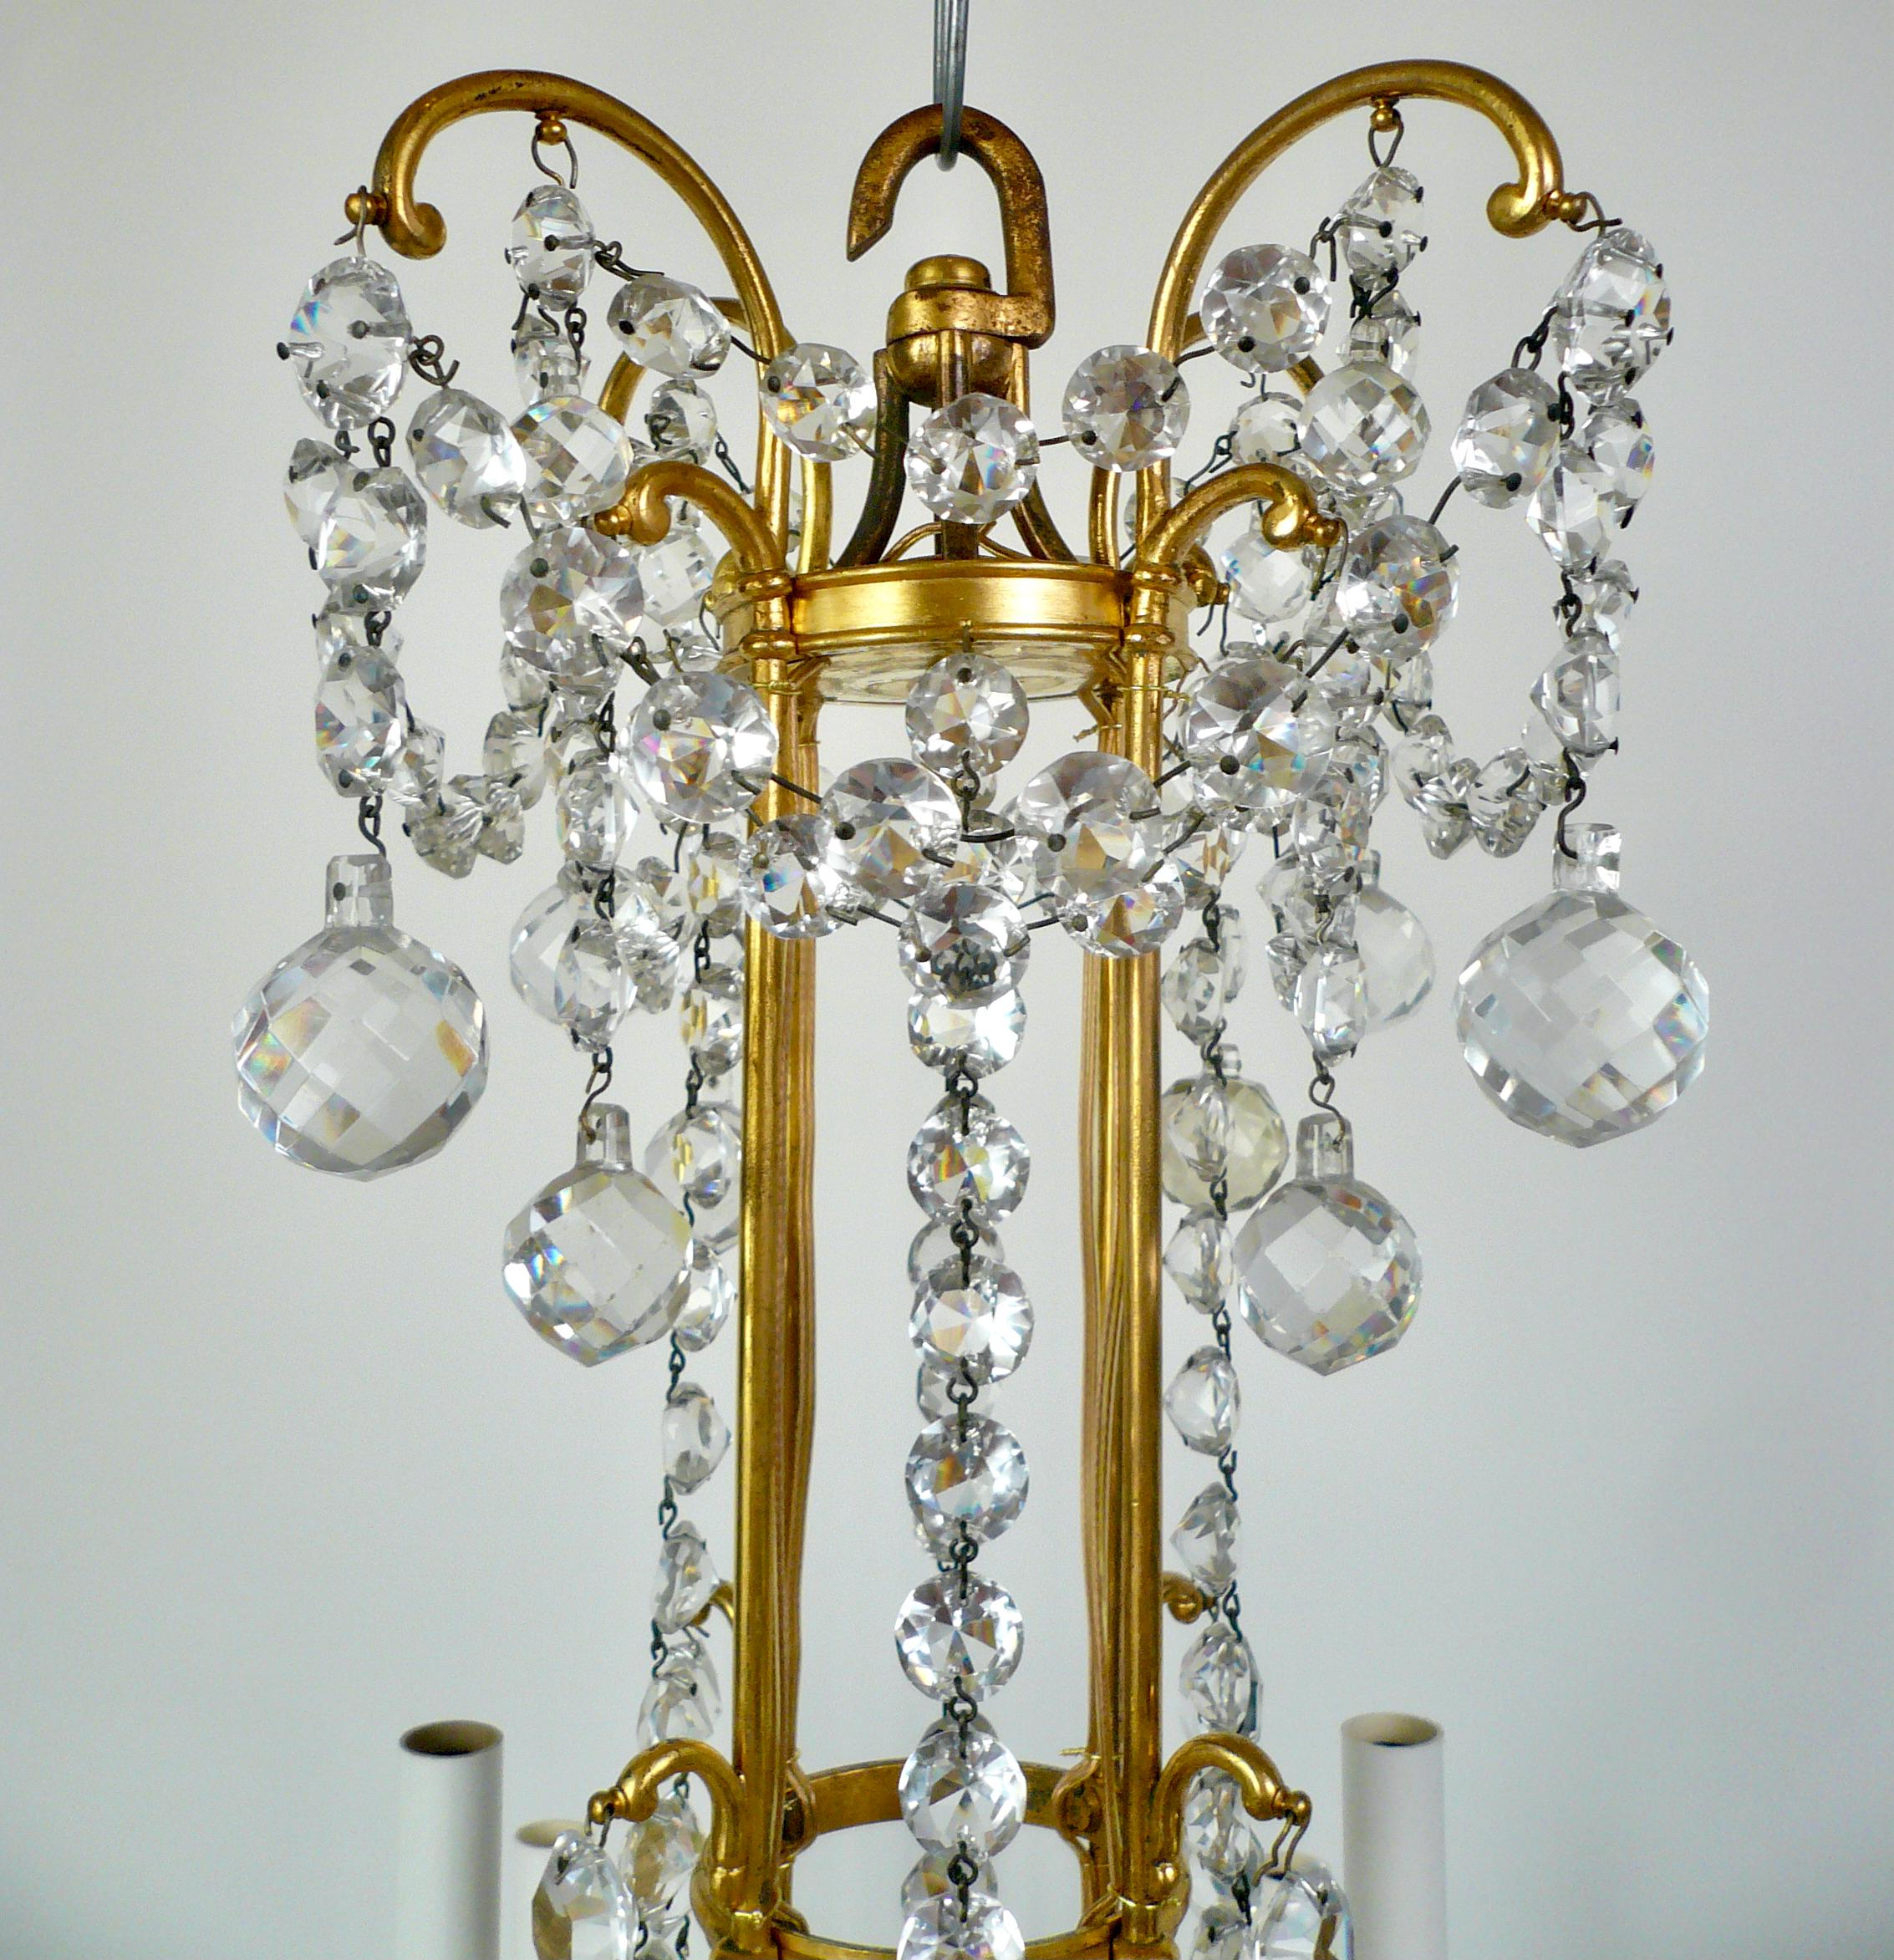 Signed Baccarat Gilt Bronze and Crystal 12 Light Chandelier, circa 1890 For Sale 4